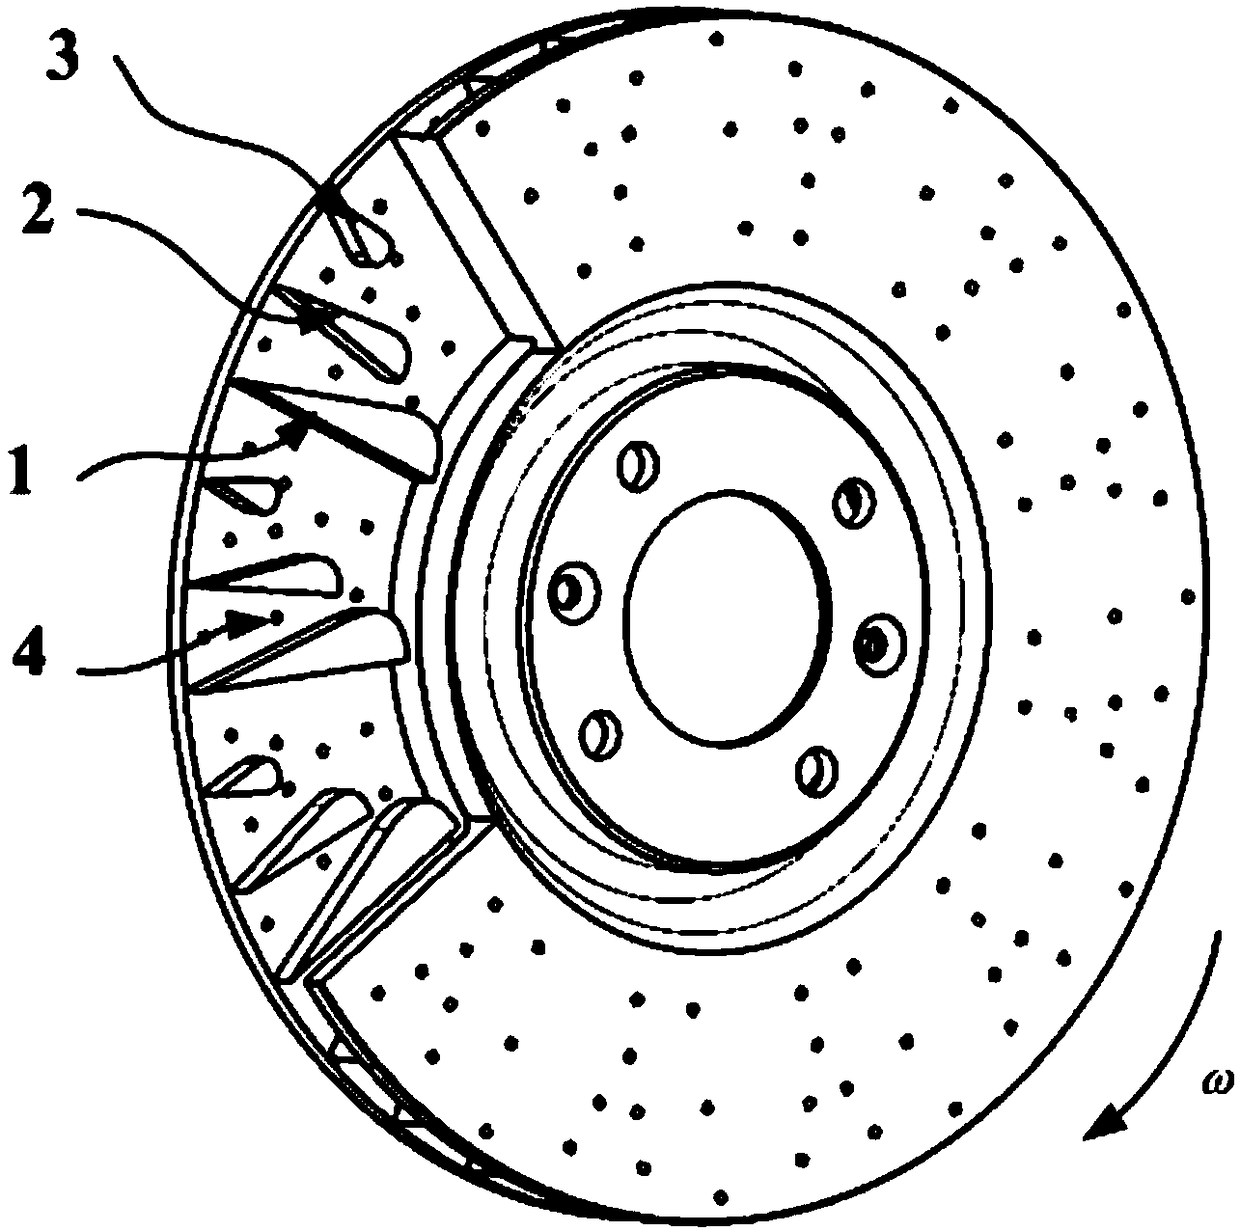 An air-cooled vehicle brake disc with air passage